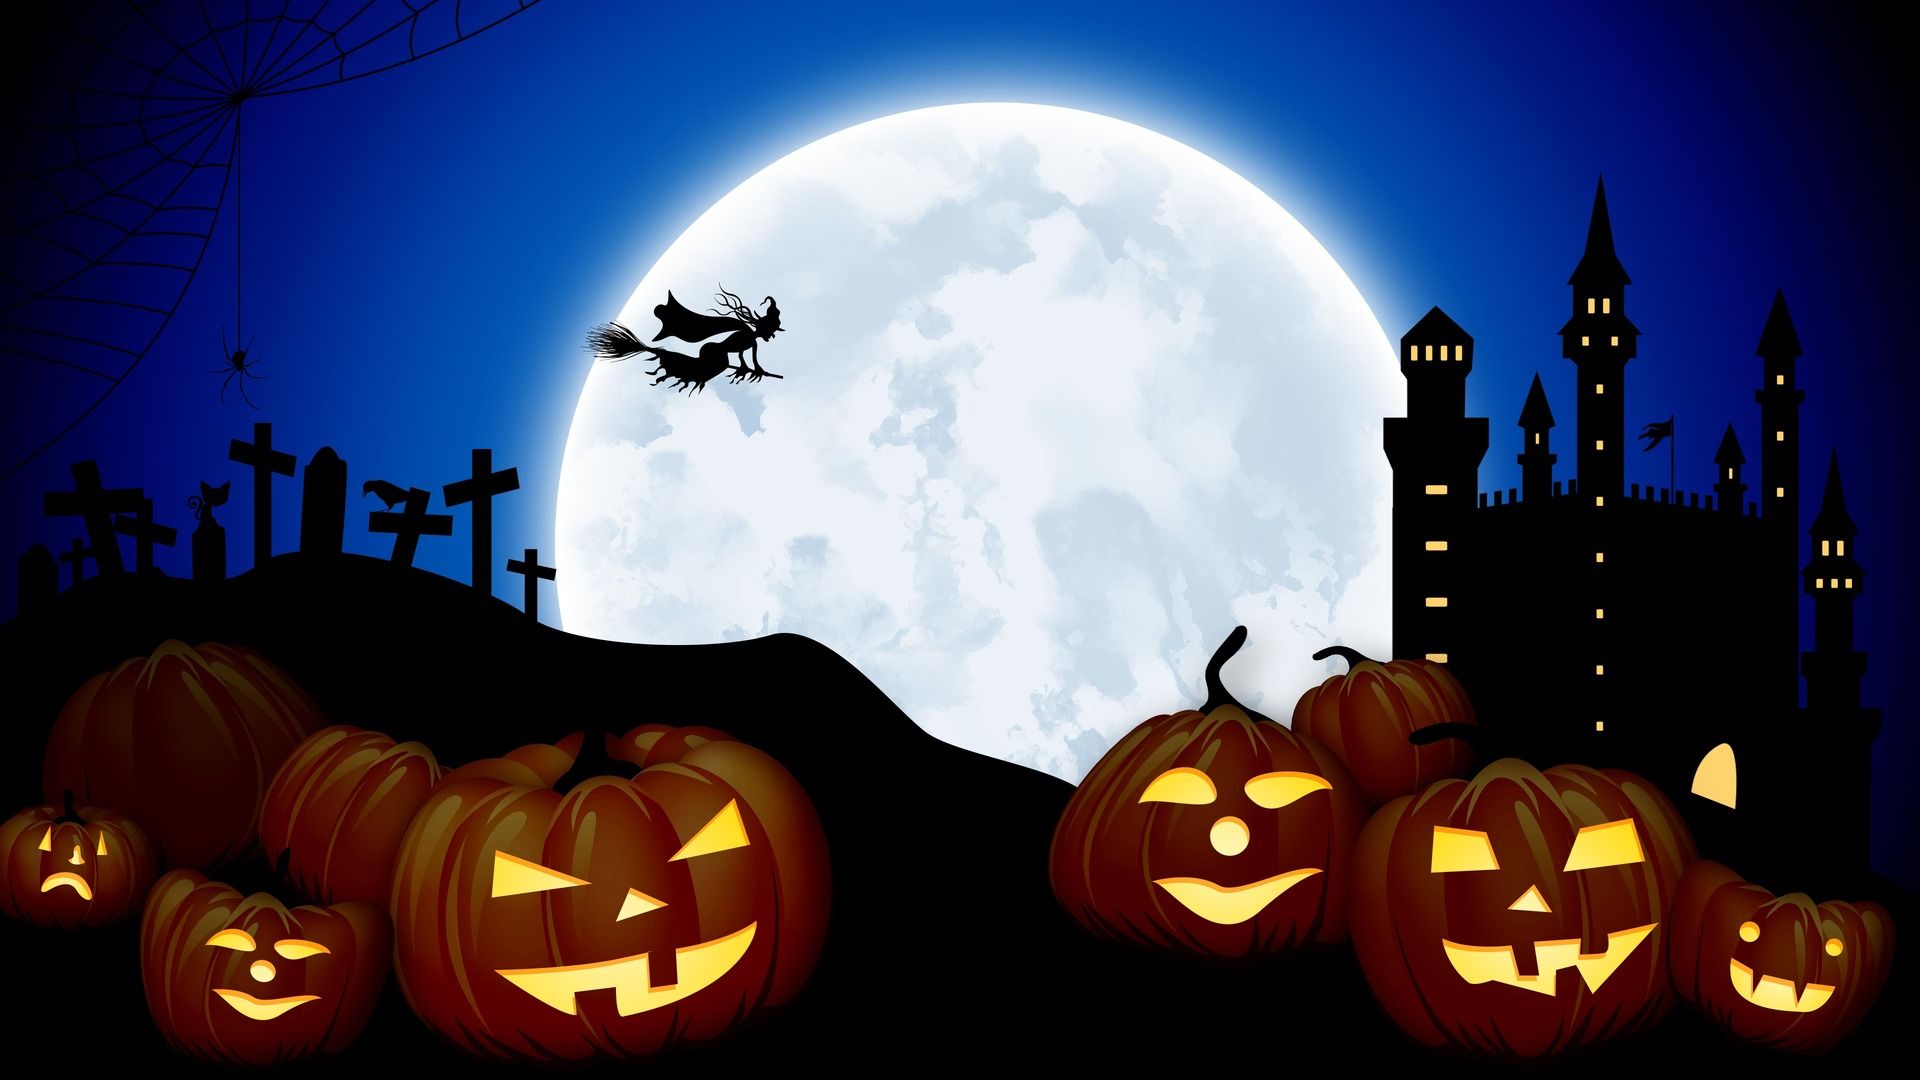 Free download Download Halloween Wallpaper for Mac OS X El Capitan and [1920x1080] for your Desktop, Mobile & Tablet. Explore Free Halloween Wallpaper DesktopD Live Wallpaper Free Download